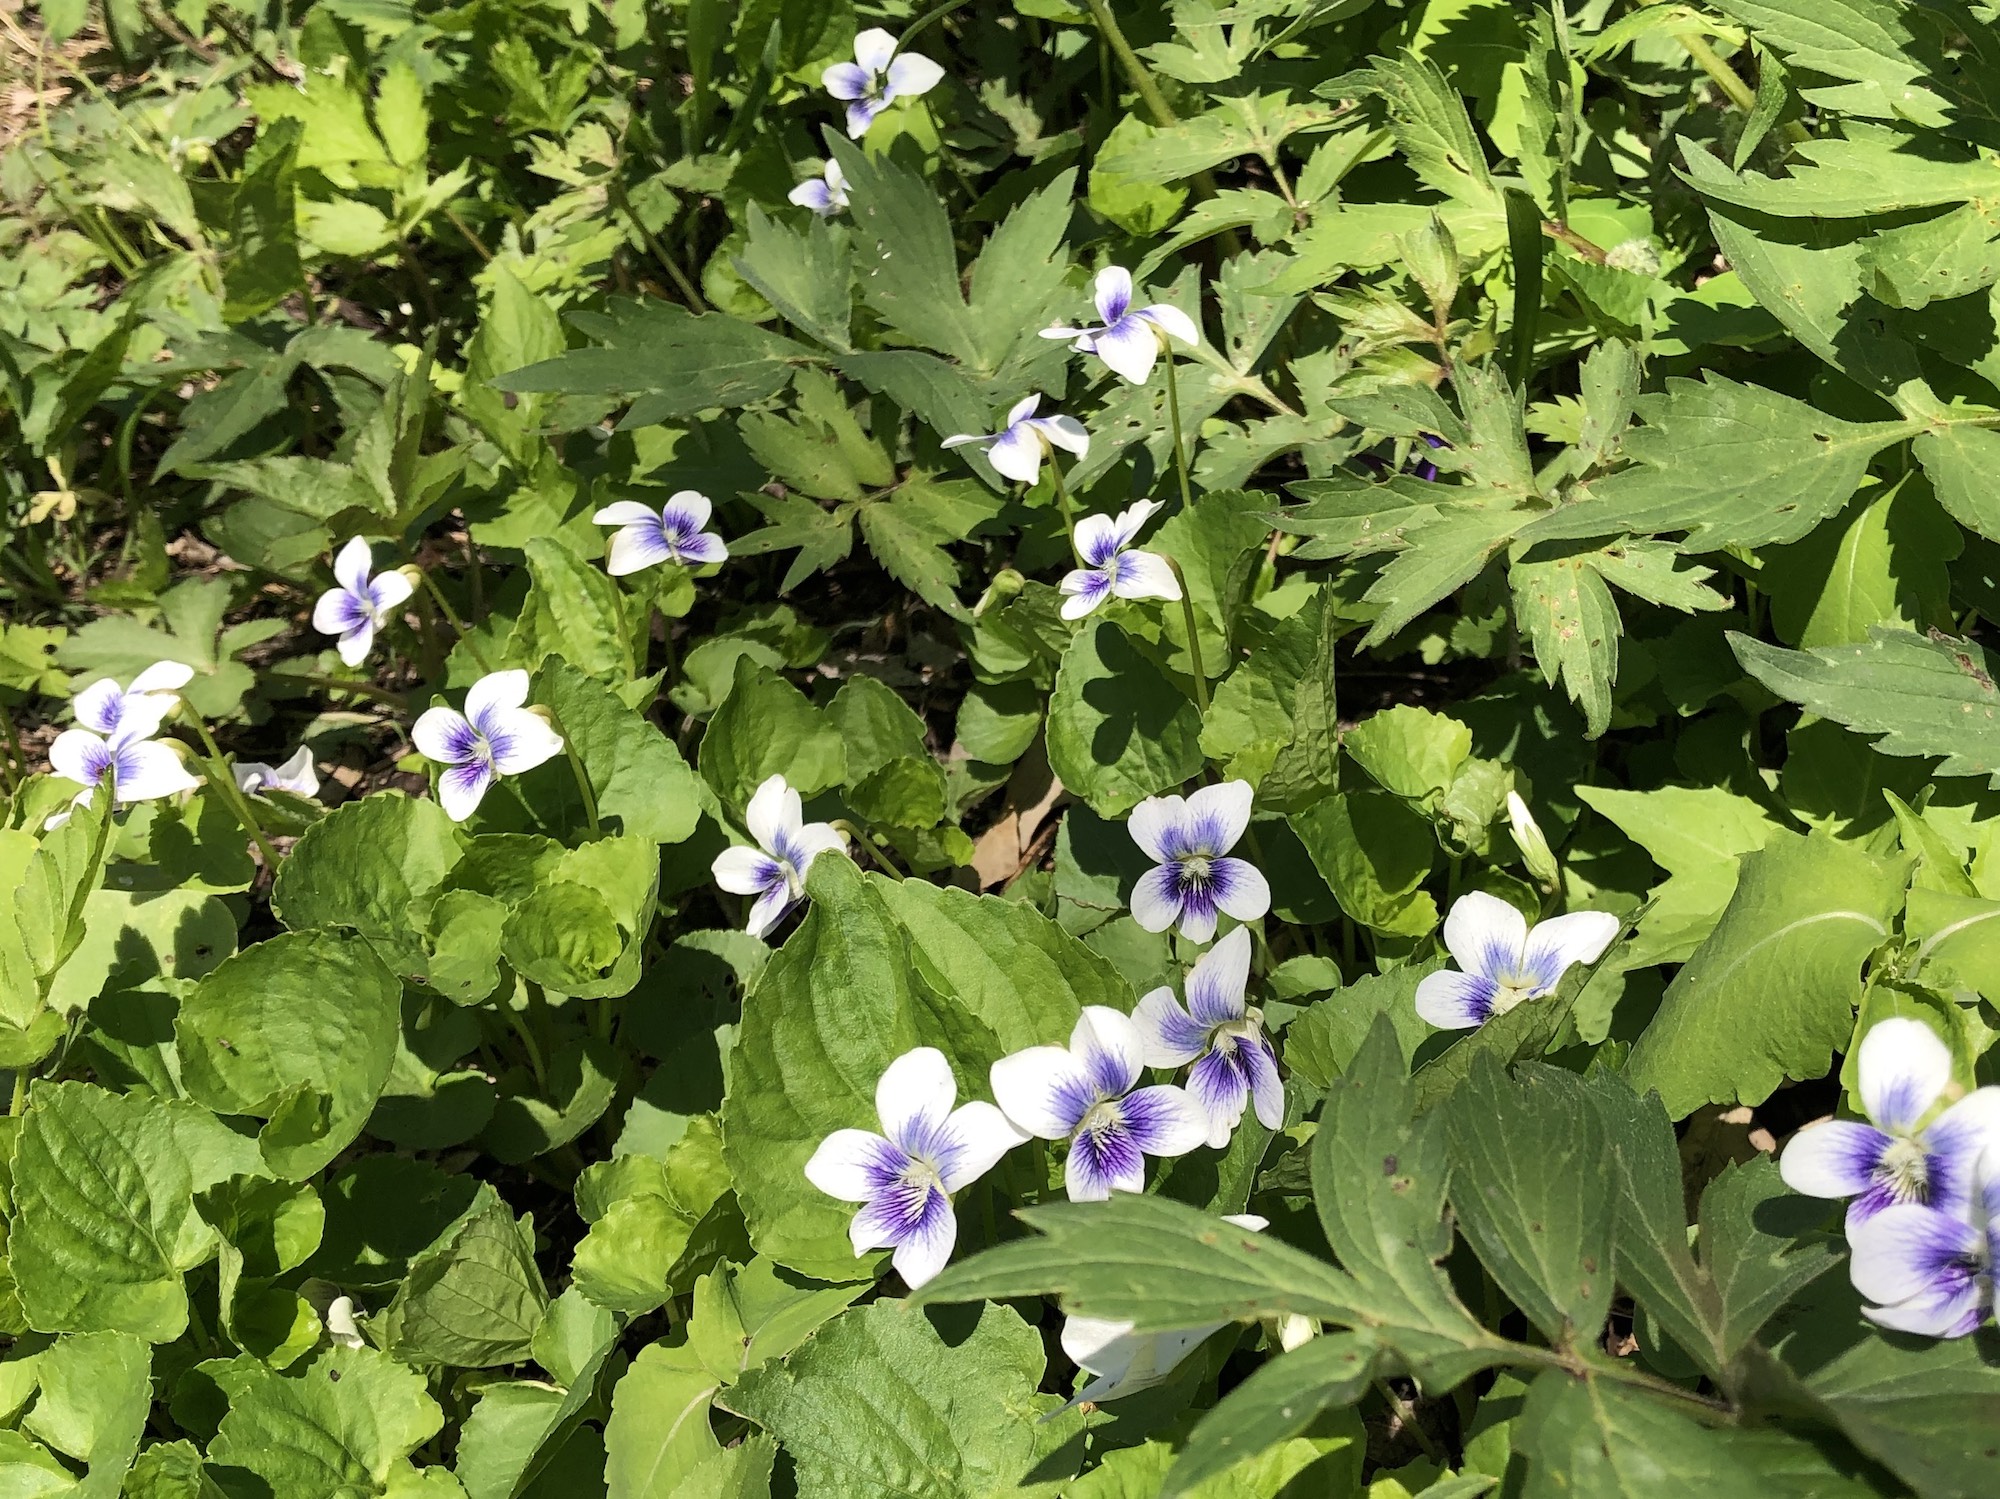 Wood Violets near the Duck Pond on May 5, 2019.